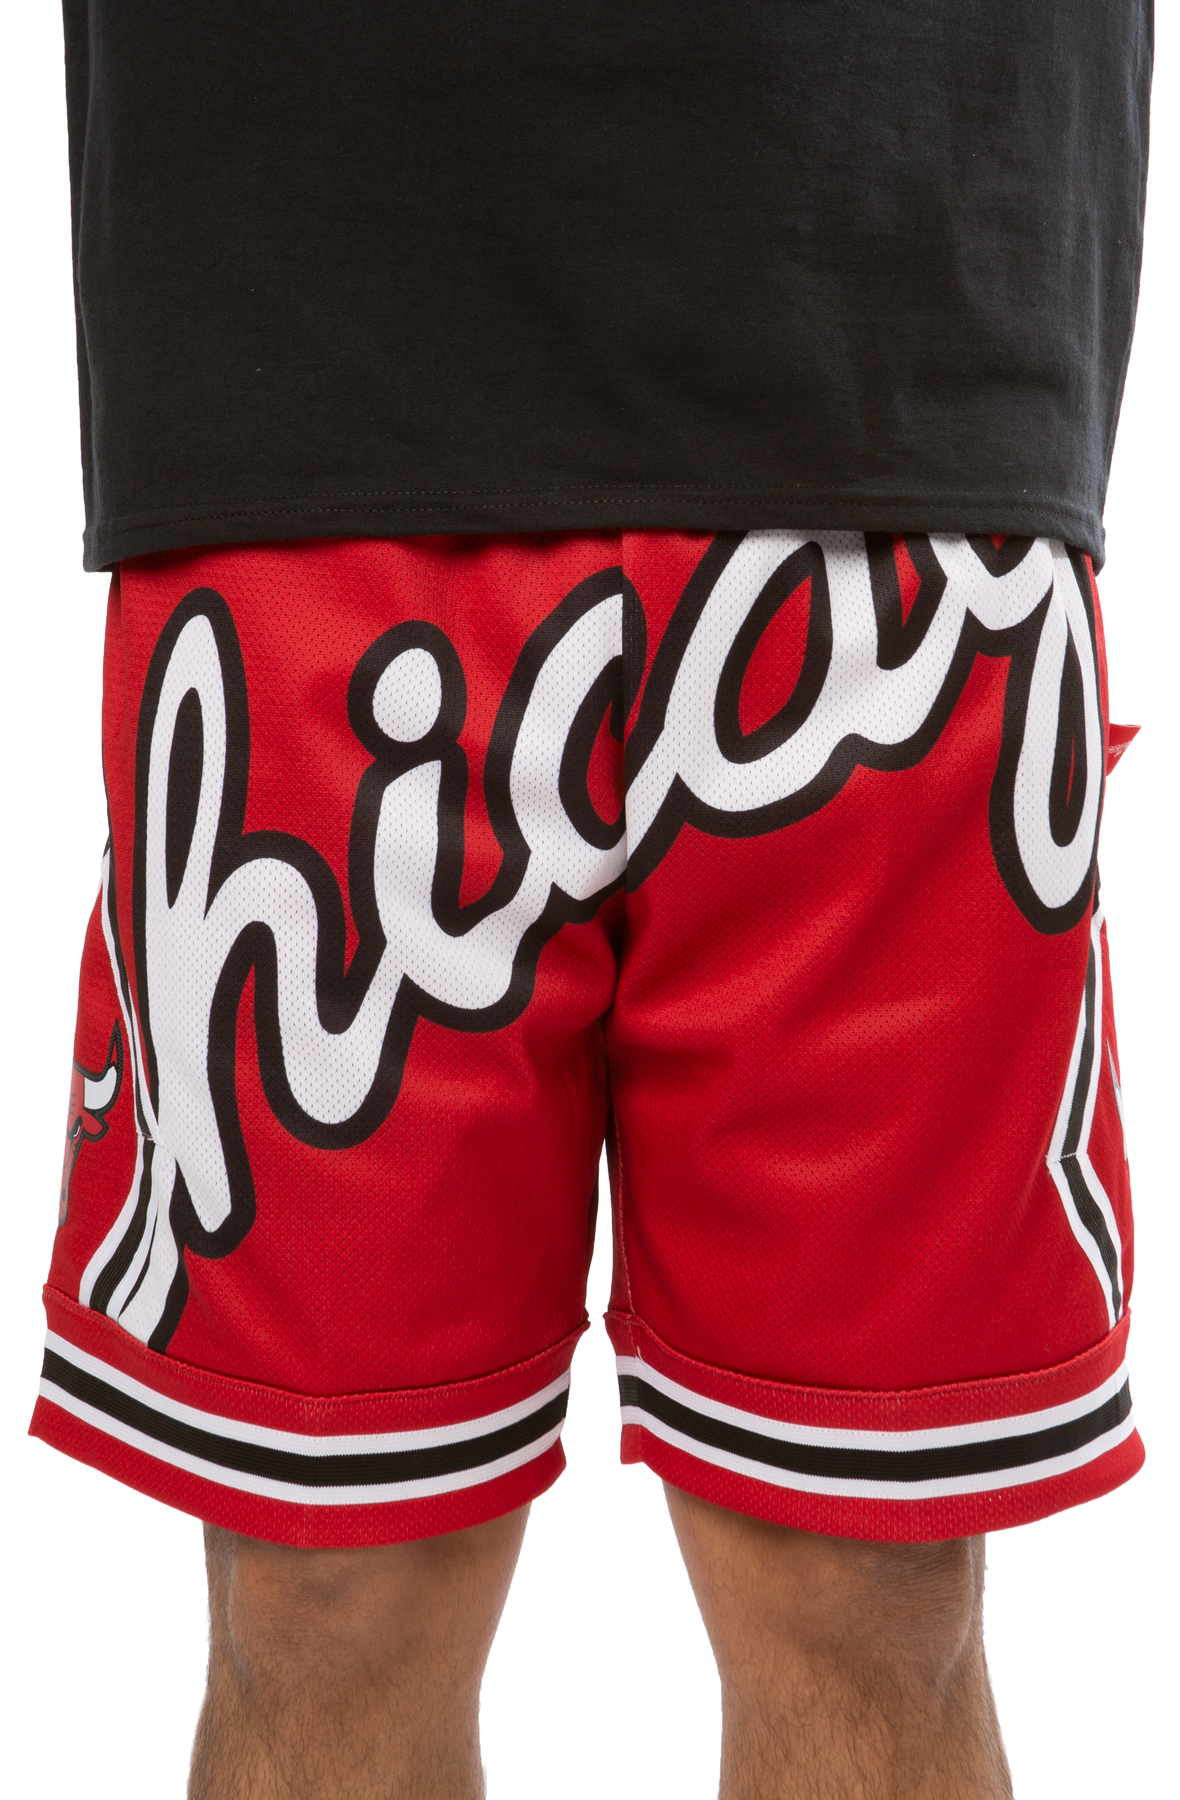 MITCHELL AND NESS Chicago Bulls Big Face Shorts SHORBW19069-CBUBLCK97 -  Shiekh